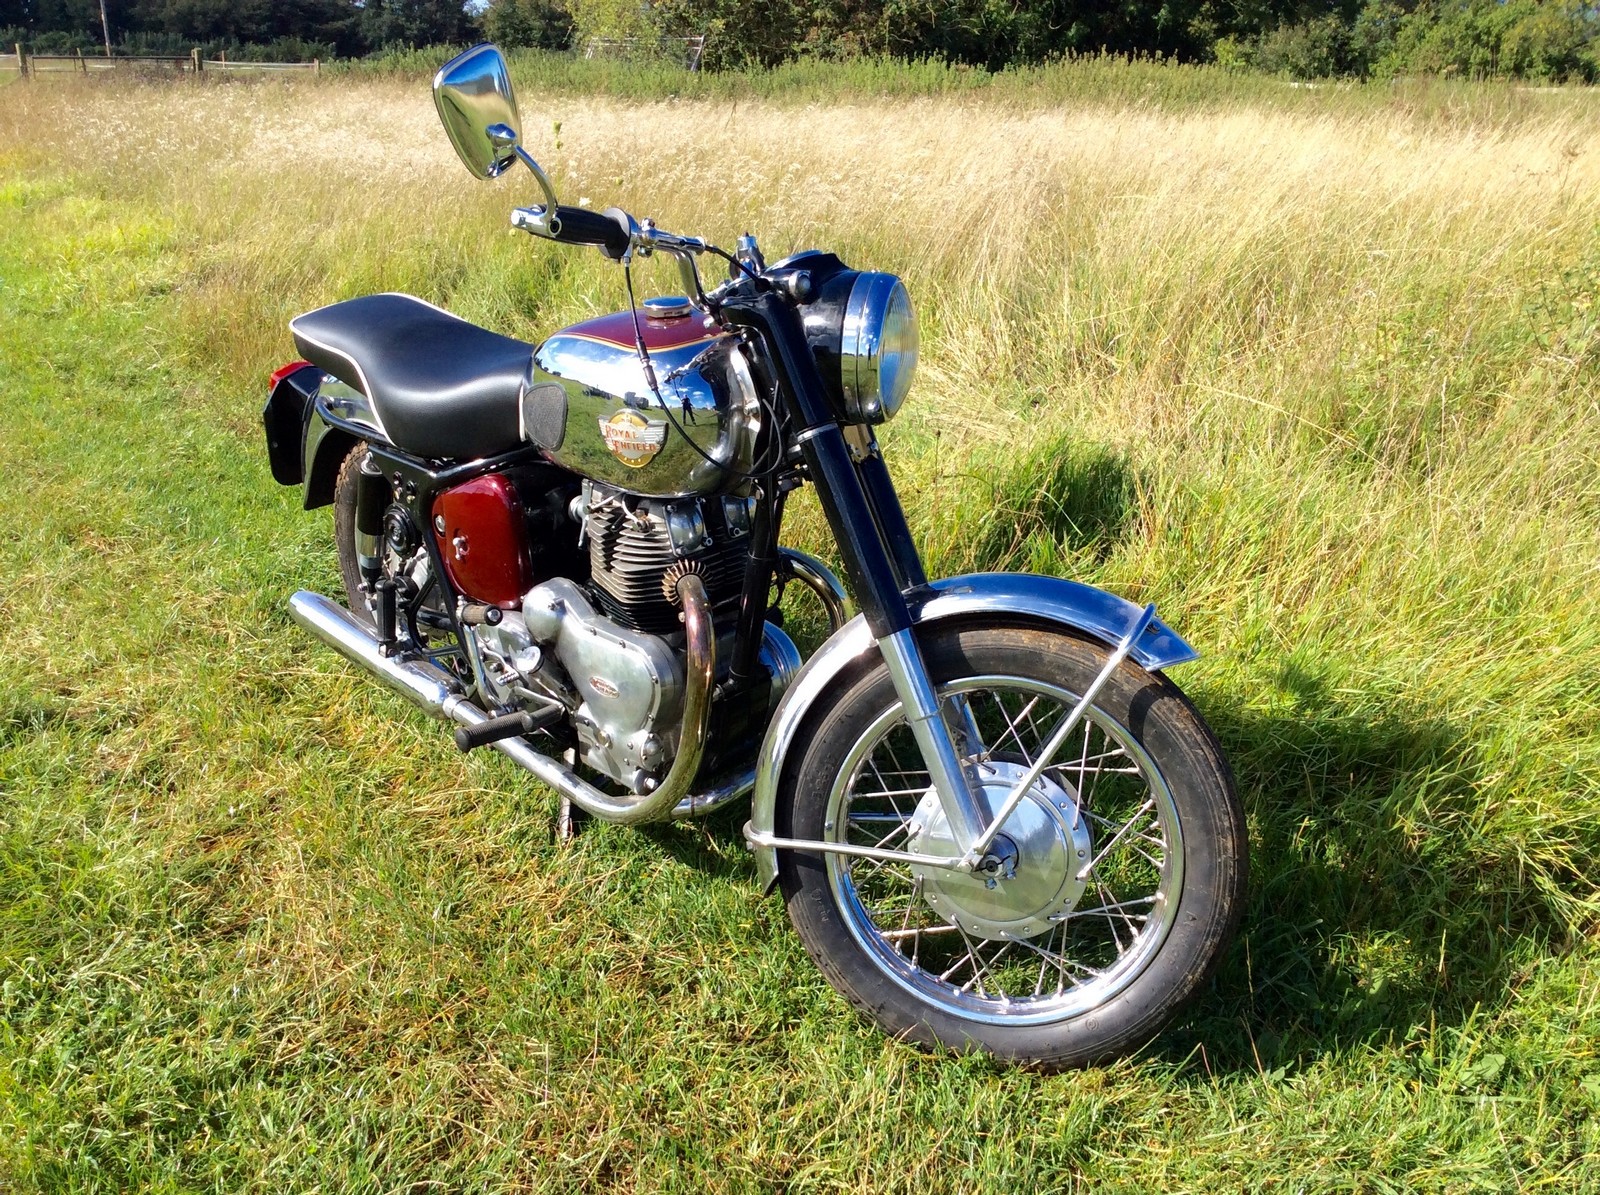 1960 Royal Enfield Meteor Minor Sport 500cc - Image 2 of 8